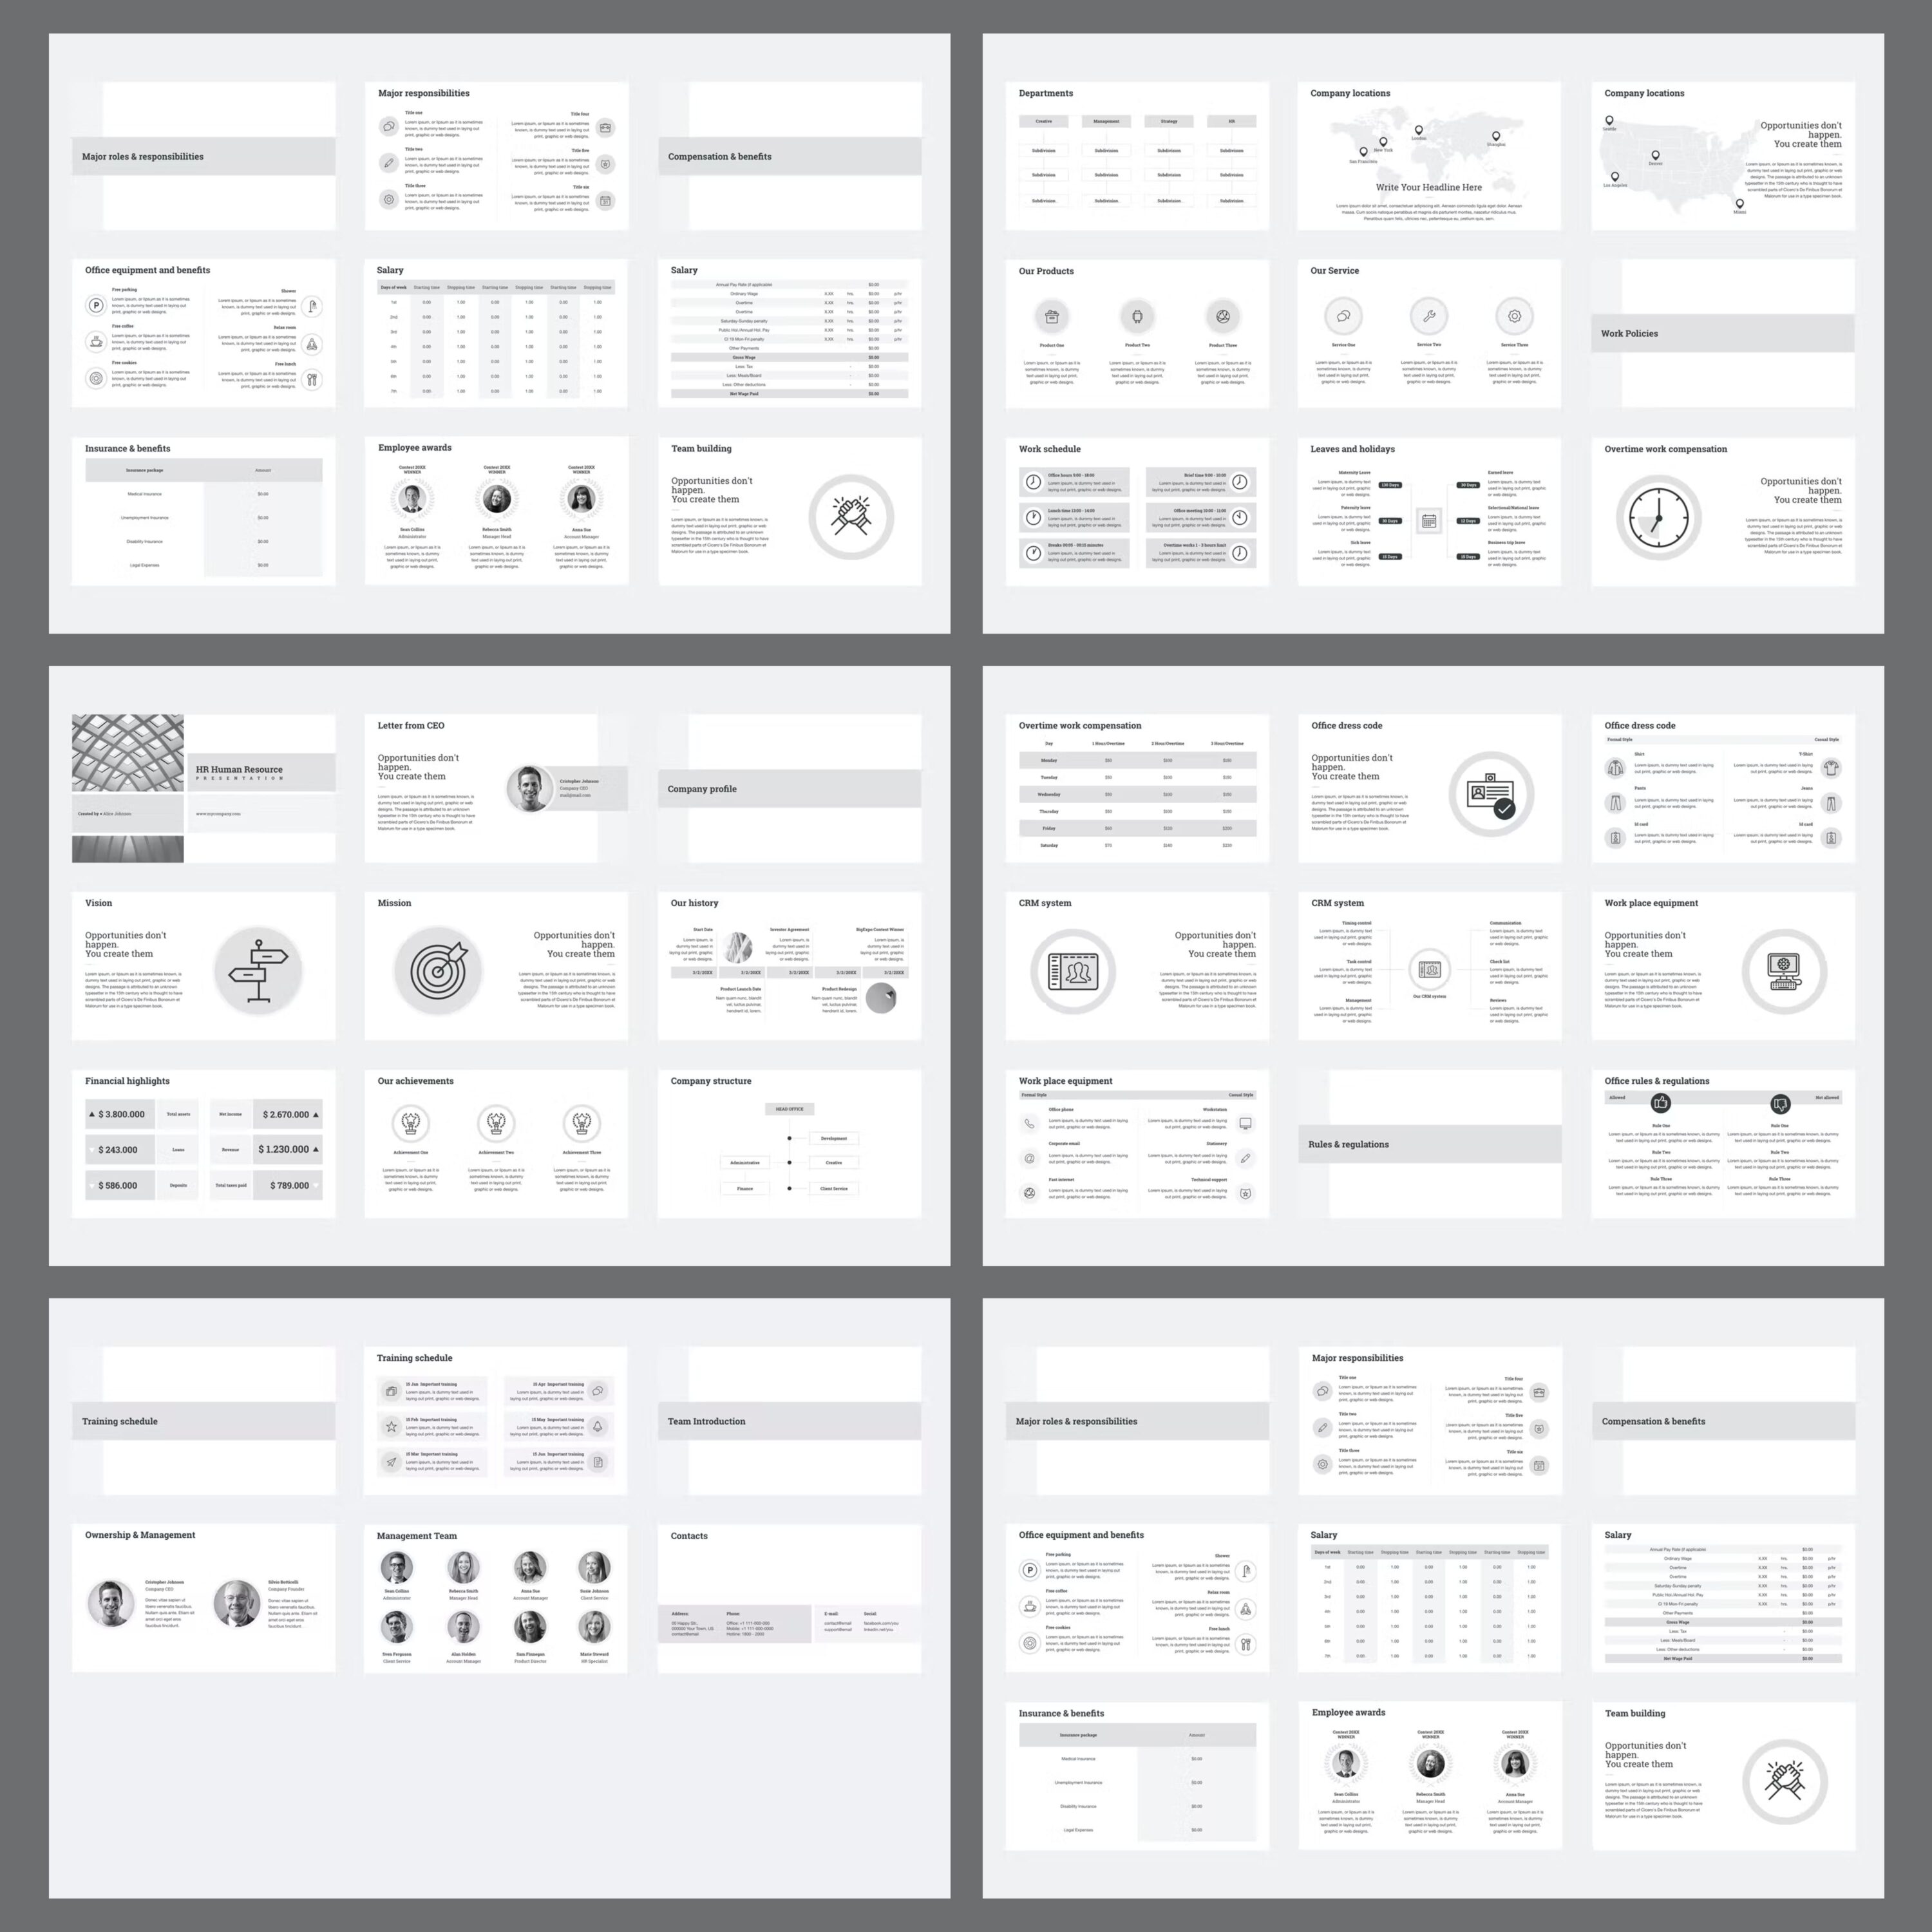 HR Human Resources Google Slides Template Preview 1500 2.